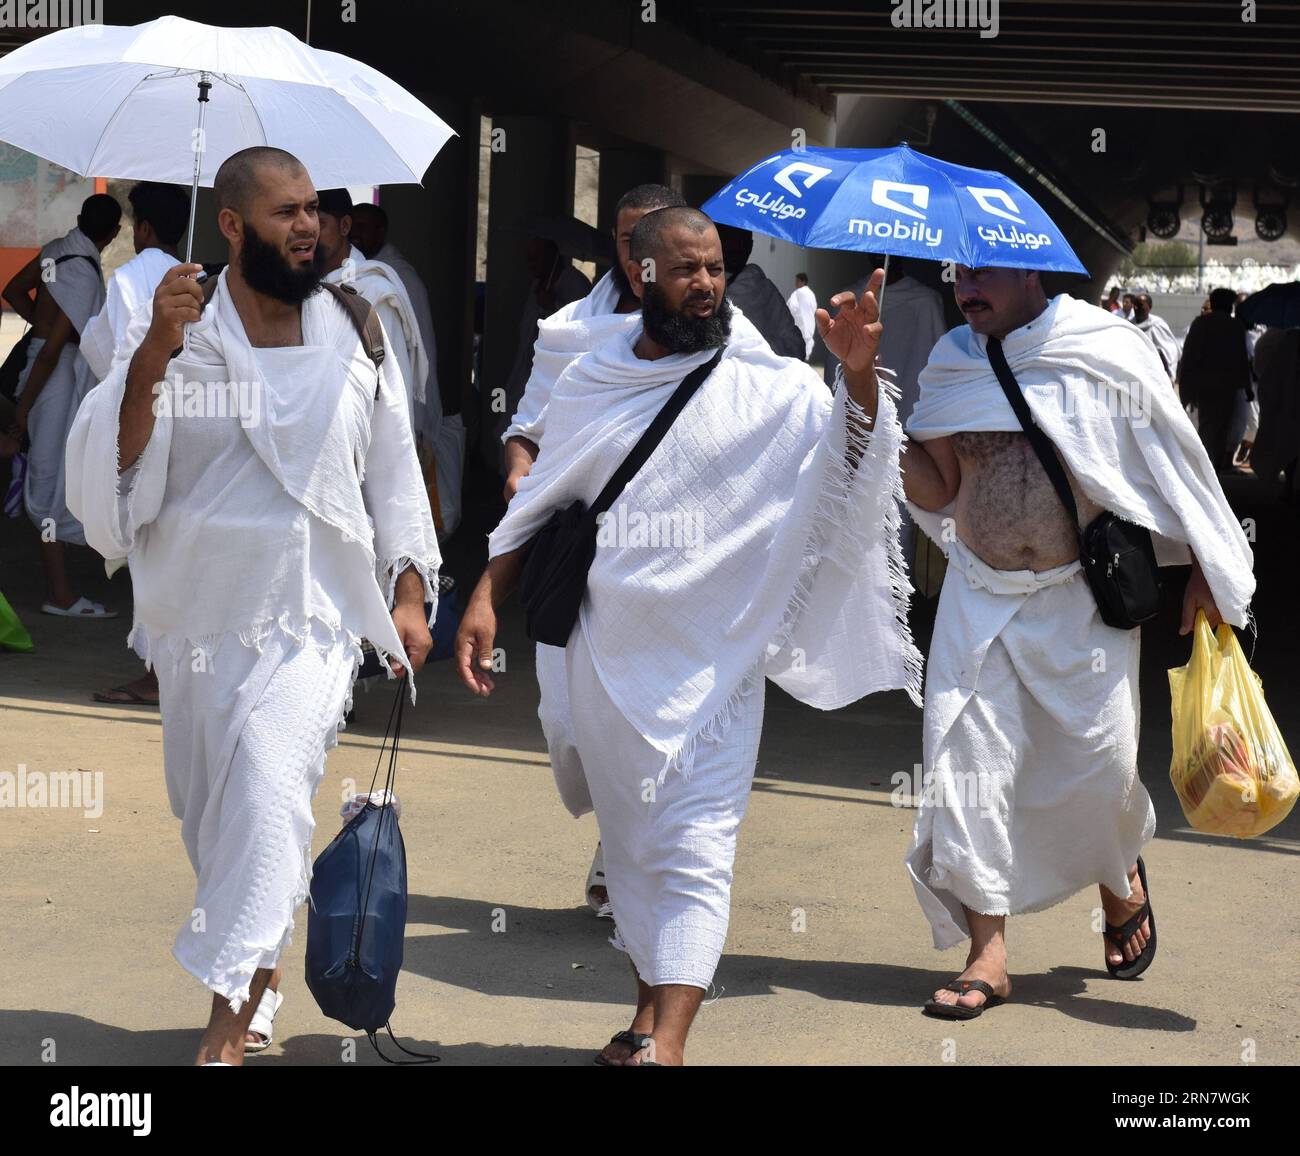 (150922) -- MECCA, Sept. 22, 2015 -- Pilgrims walk toward Mina, about seven km from Mecca, in Saudi Arabia, Sept. 22, 2015. According to the rigid Hajj schedule, pilgrims will pray and stay overnight in tents of Mina, before moving on to Arafat, a barren and plain land some 20 km east of Mecca, and then to Muzdalifah, an area between Arafat and Mina, to celebrate Eid al-Adha, or the Feast of Sacrifice. ) (djj) SAUDI ARABIA-MECCA-HAJJ MinxJunqing PUBLICATIONxNOTxINxCHN   Mecca Sept 22 2015 PilgrimS Walk Toward Mina About Seven km from Mecca in Saudi Arabia Sept 22 2015 According to The rigid Ha Stock Photo